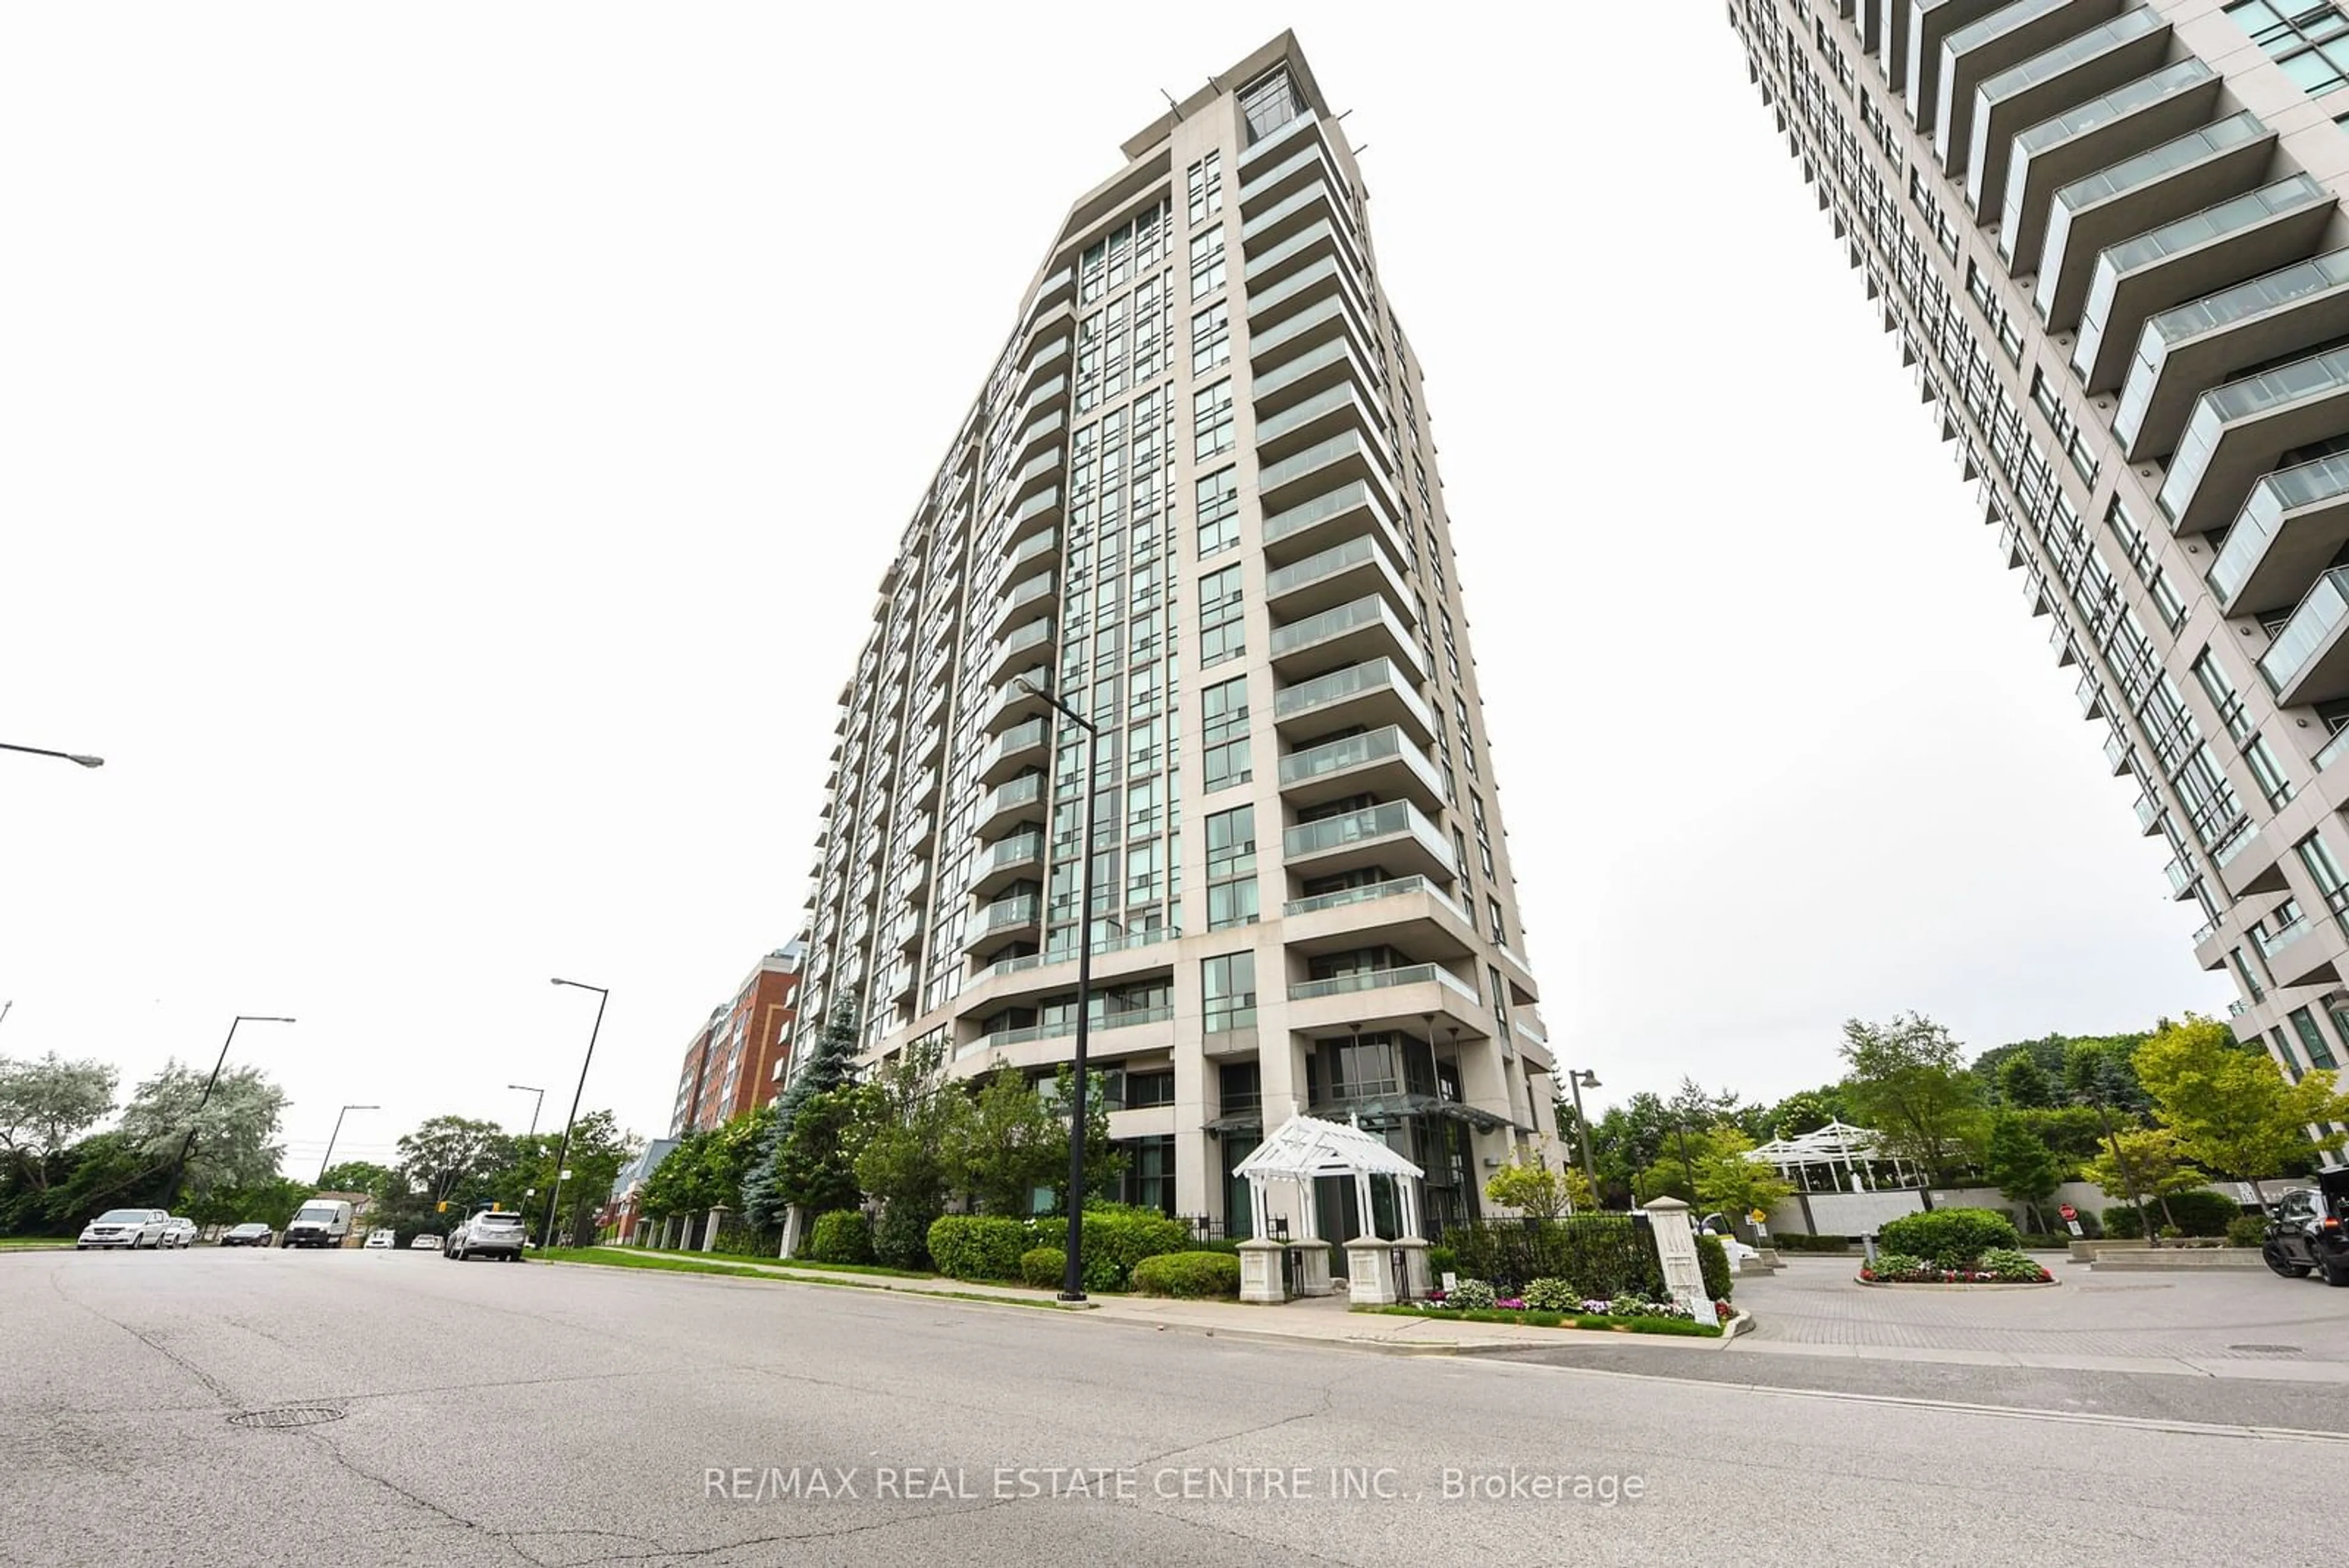 A pic from exterior of the house or condo for 68 Grangeway Ave #1816, Toronto Ontario M1H 0A1